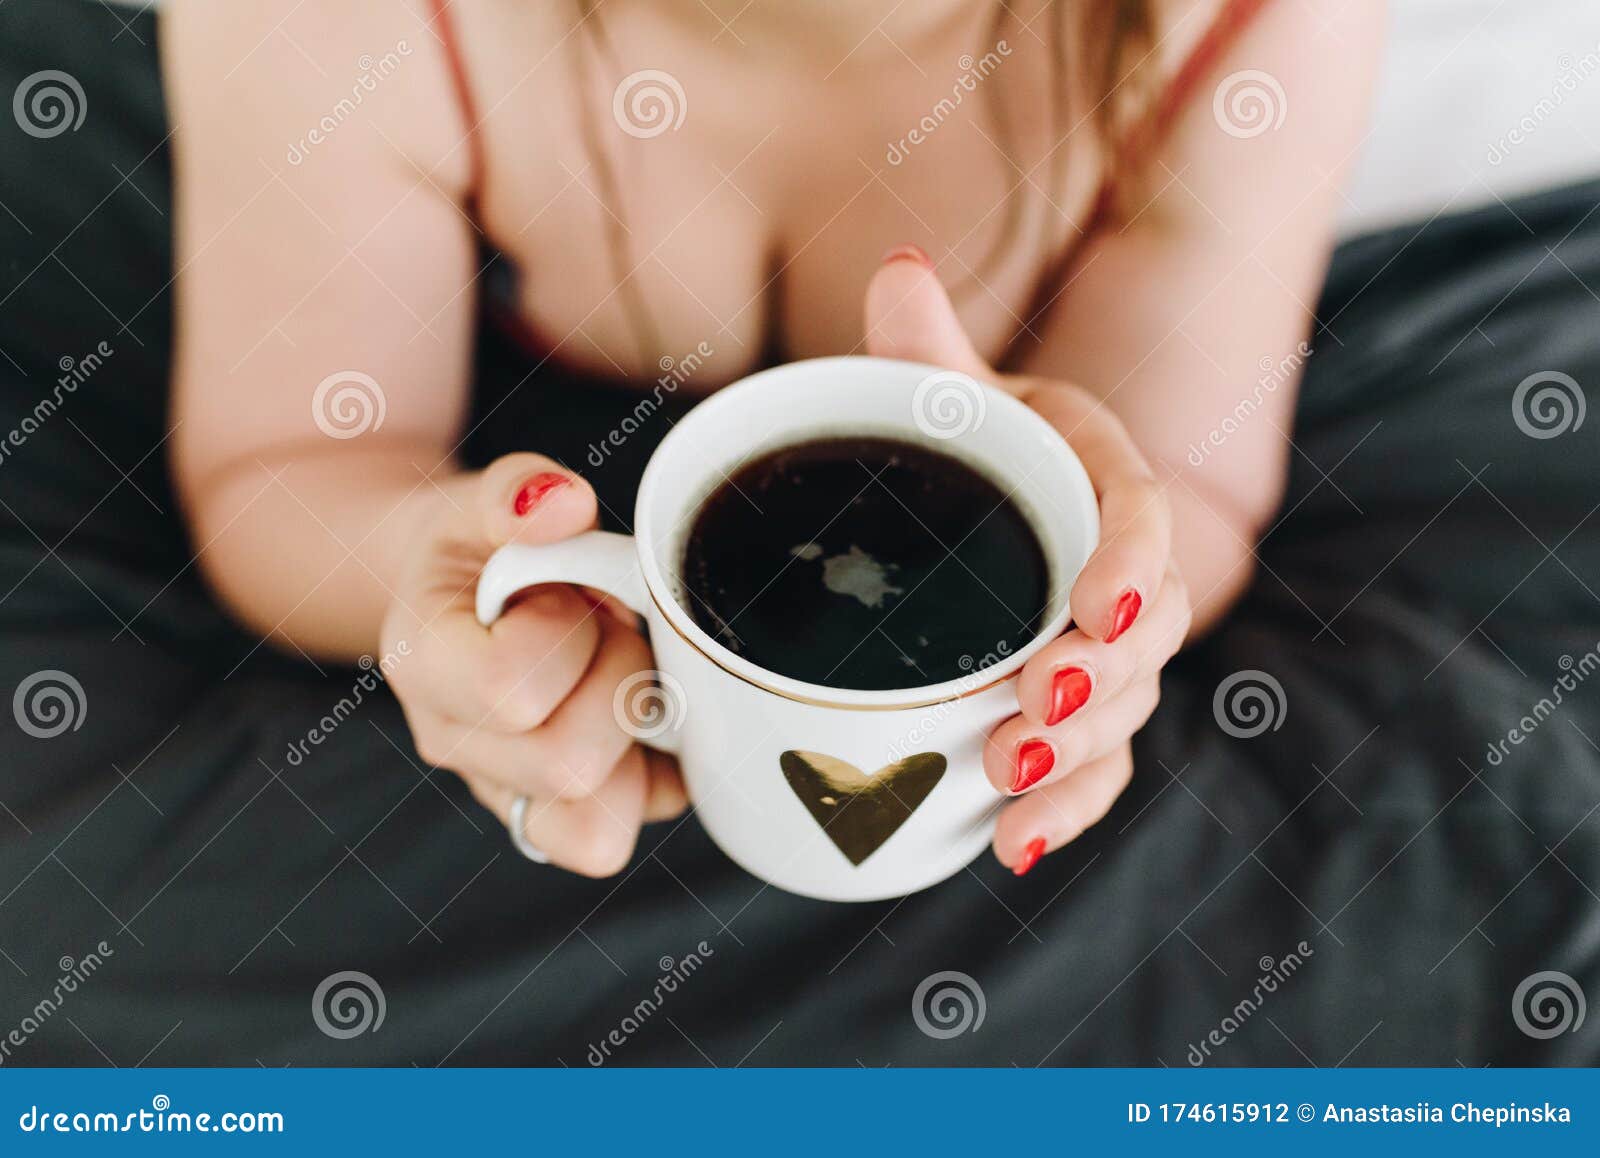 coffee and cleavage